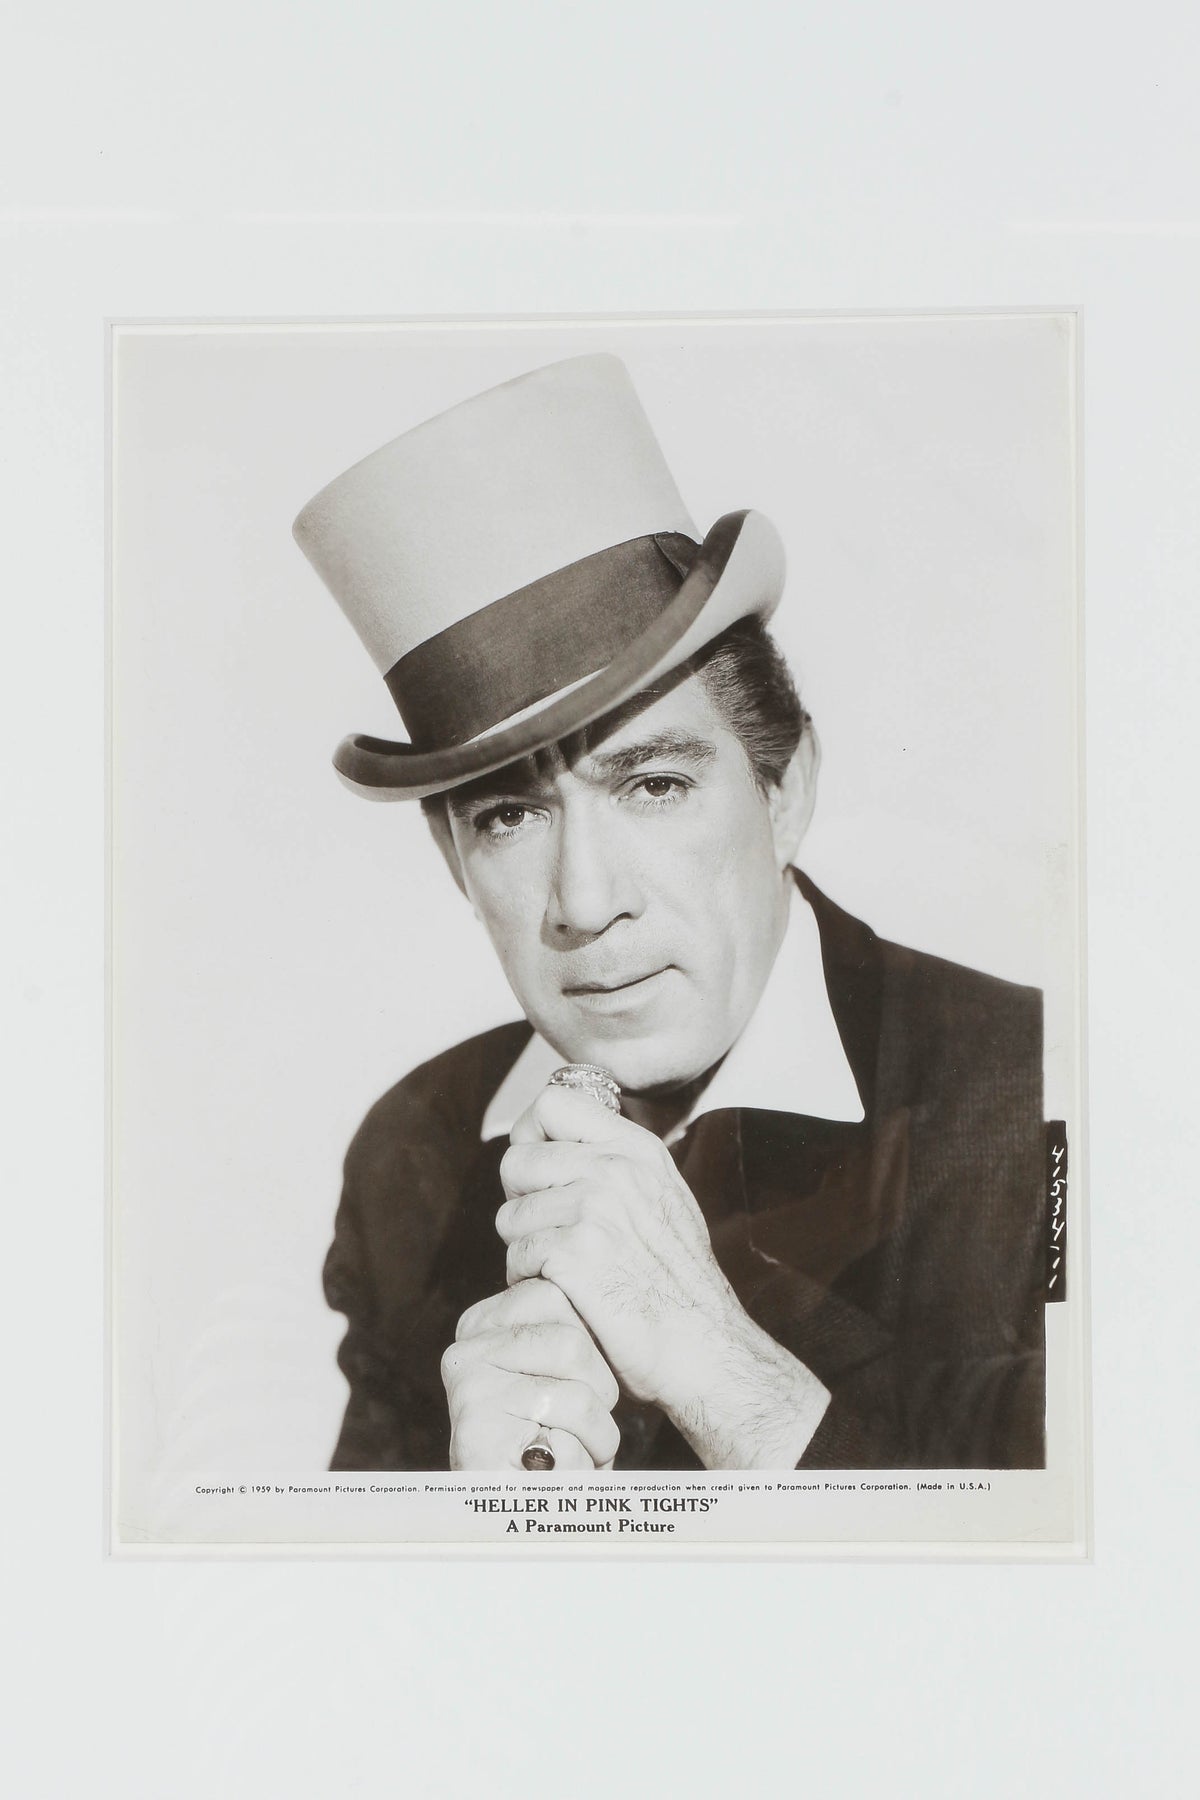 Movie Photo "Heller in Pink Tights", Anthony Quinn, 1960